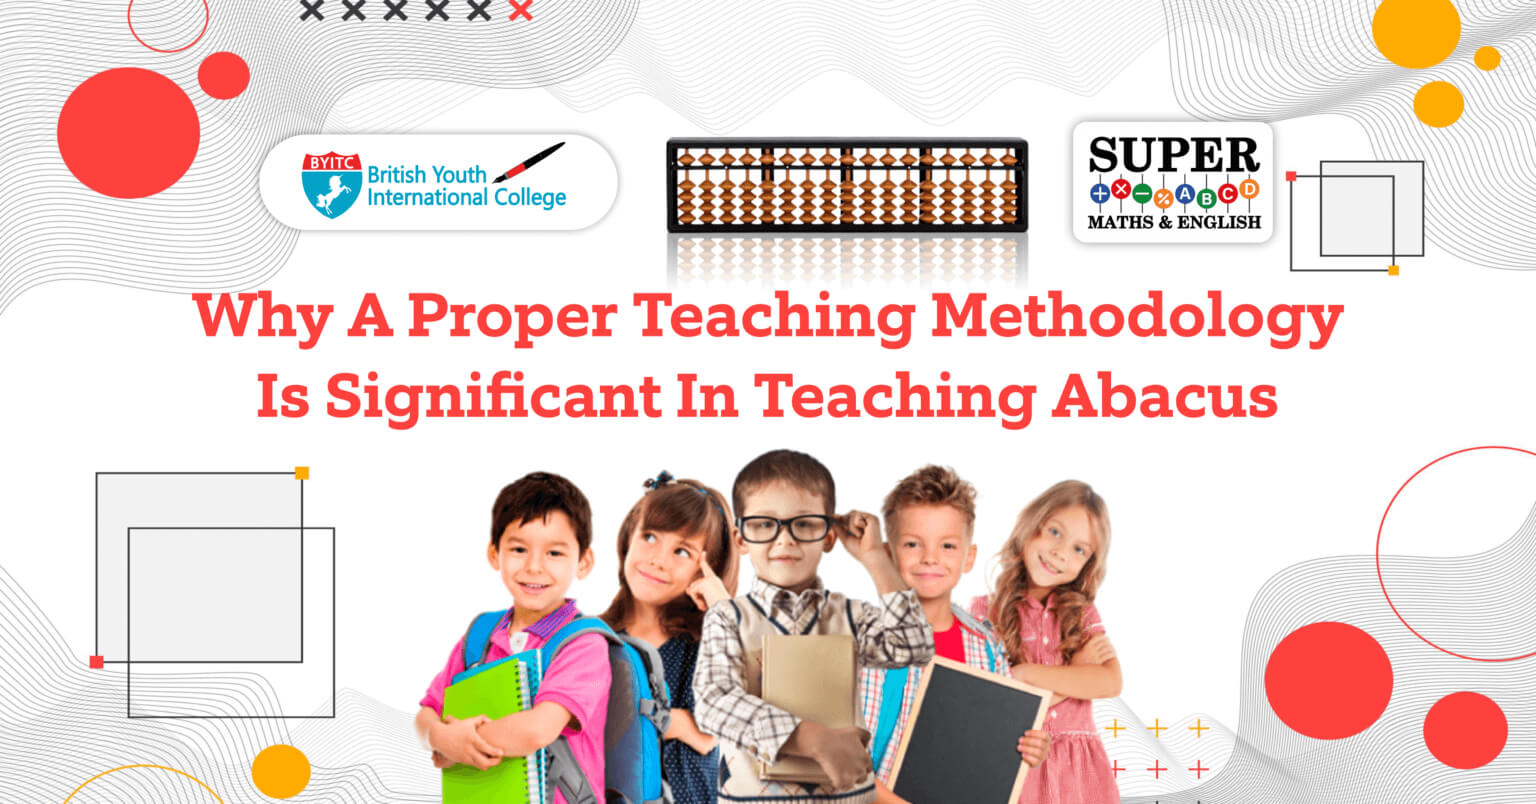 Why a Proper Teaching Methodology is Significant in Teaching Abacus